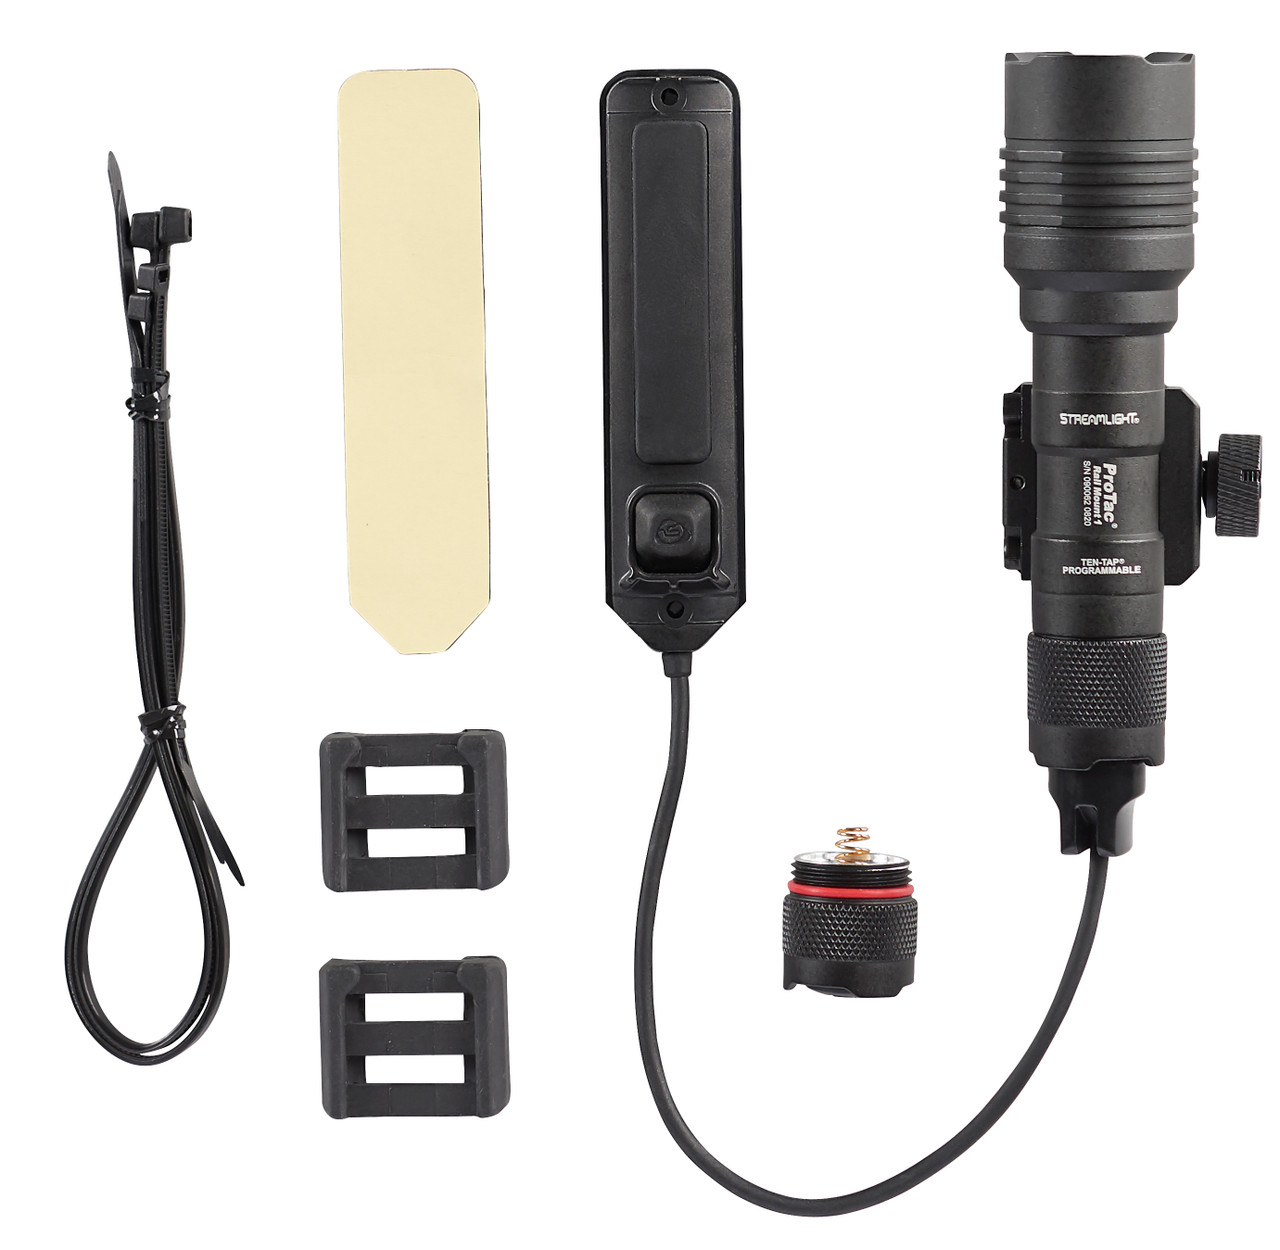 Streamlight 88058 ProTac Railmount 1L - includes remote switch tail switch remote retaining clips mounting hardware and 1 AA alkaline and 1 CR123A lithium battery - Box - Black - DSS